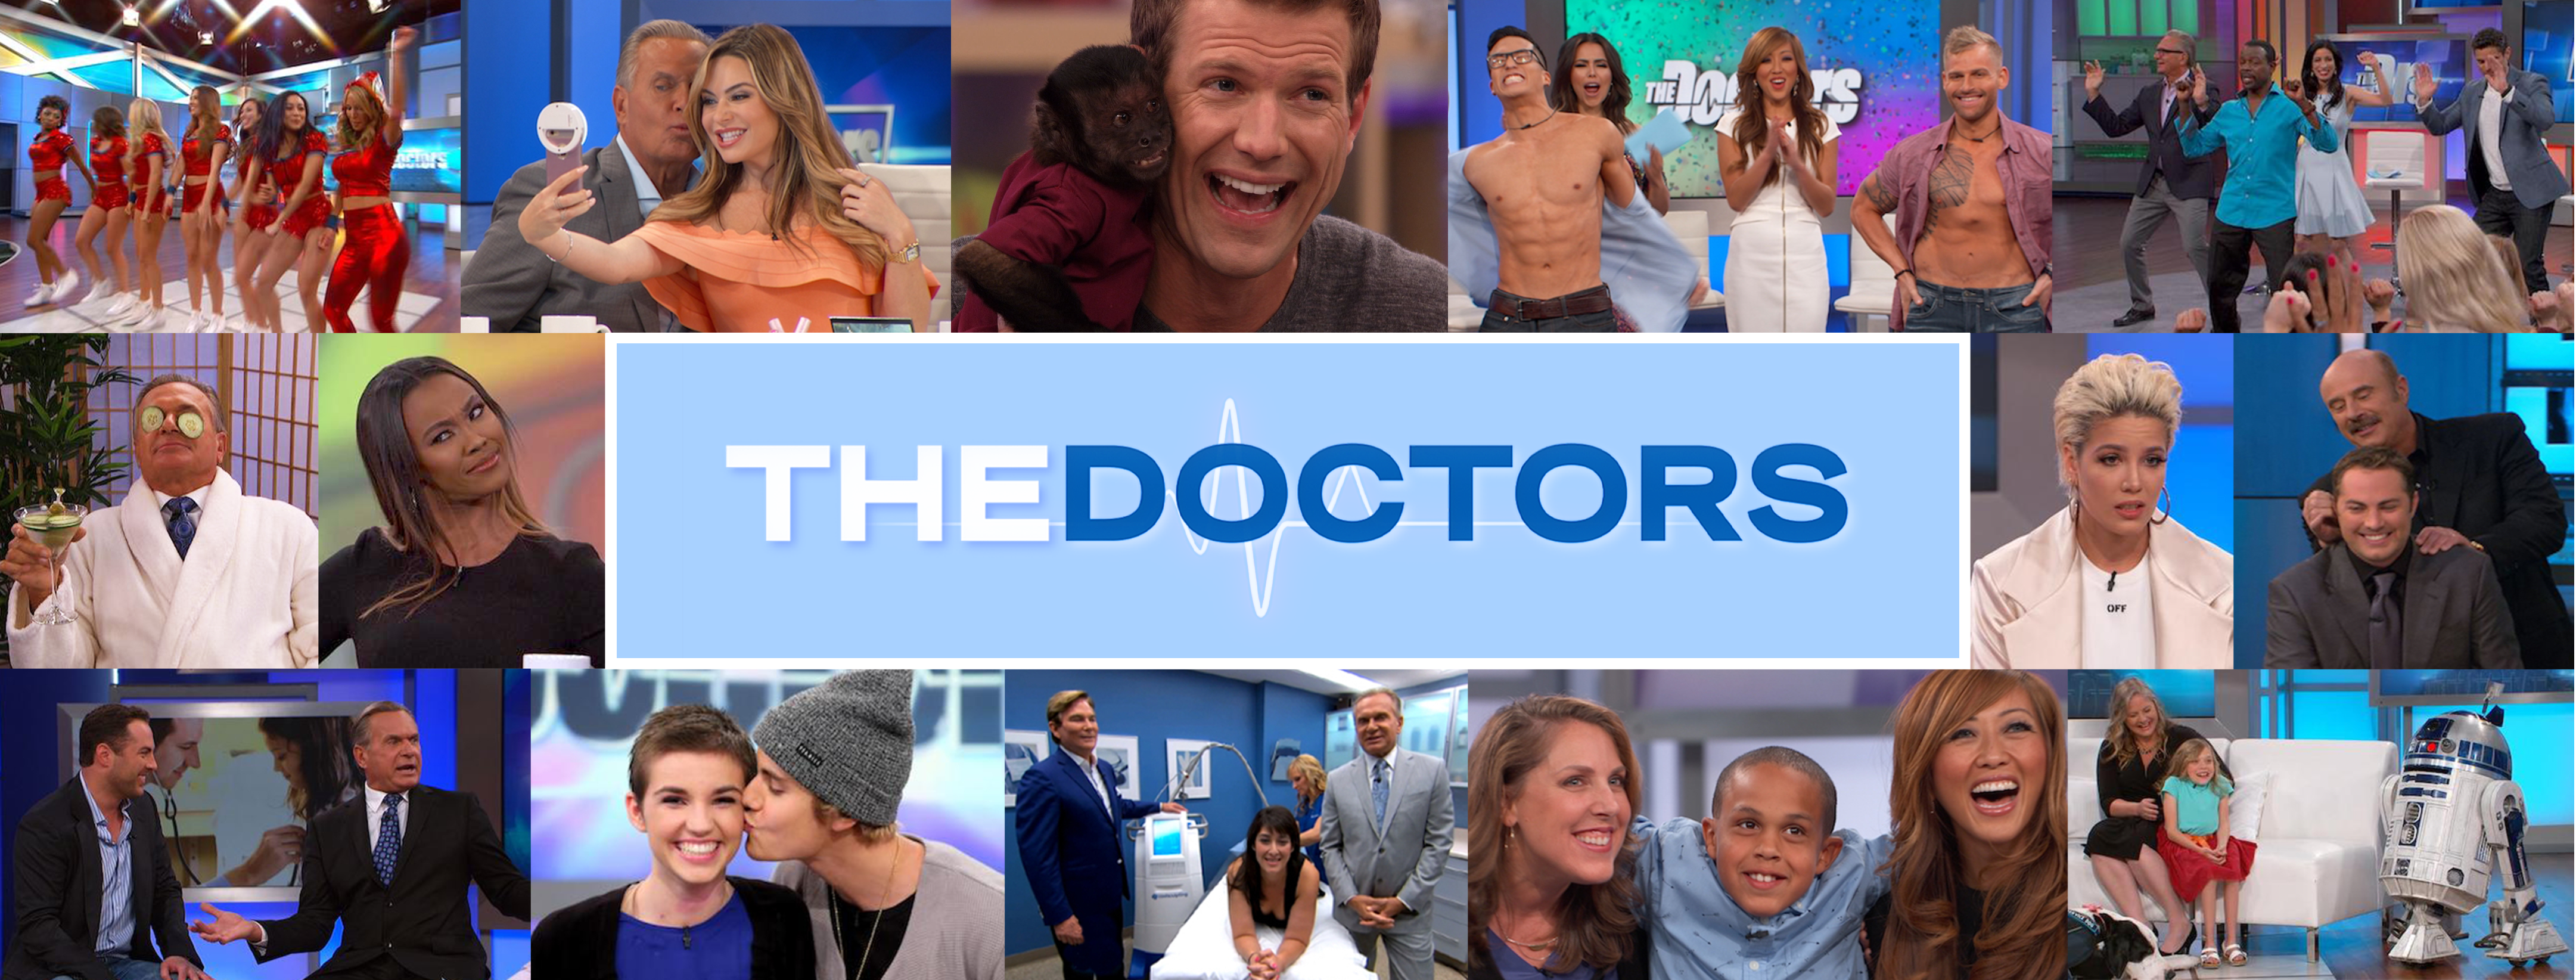 Could a Shot Stop High Heel Pain? | The Doctors TV Show